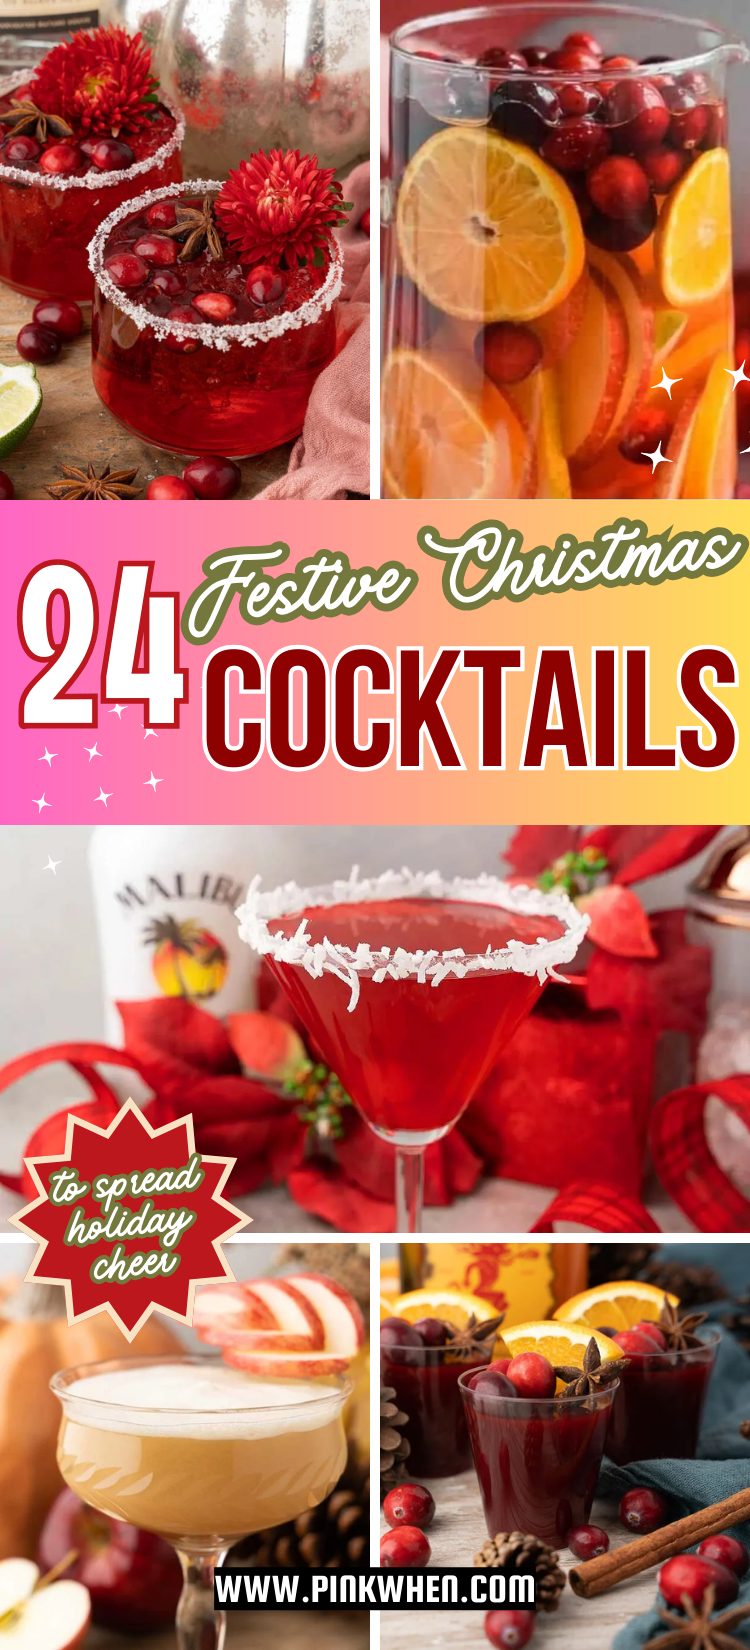 24 Festive Christmas Cocktails to Spread Holiday Cheer